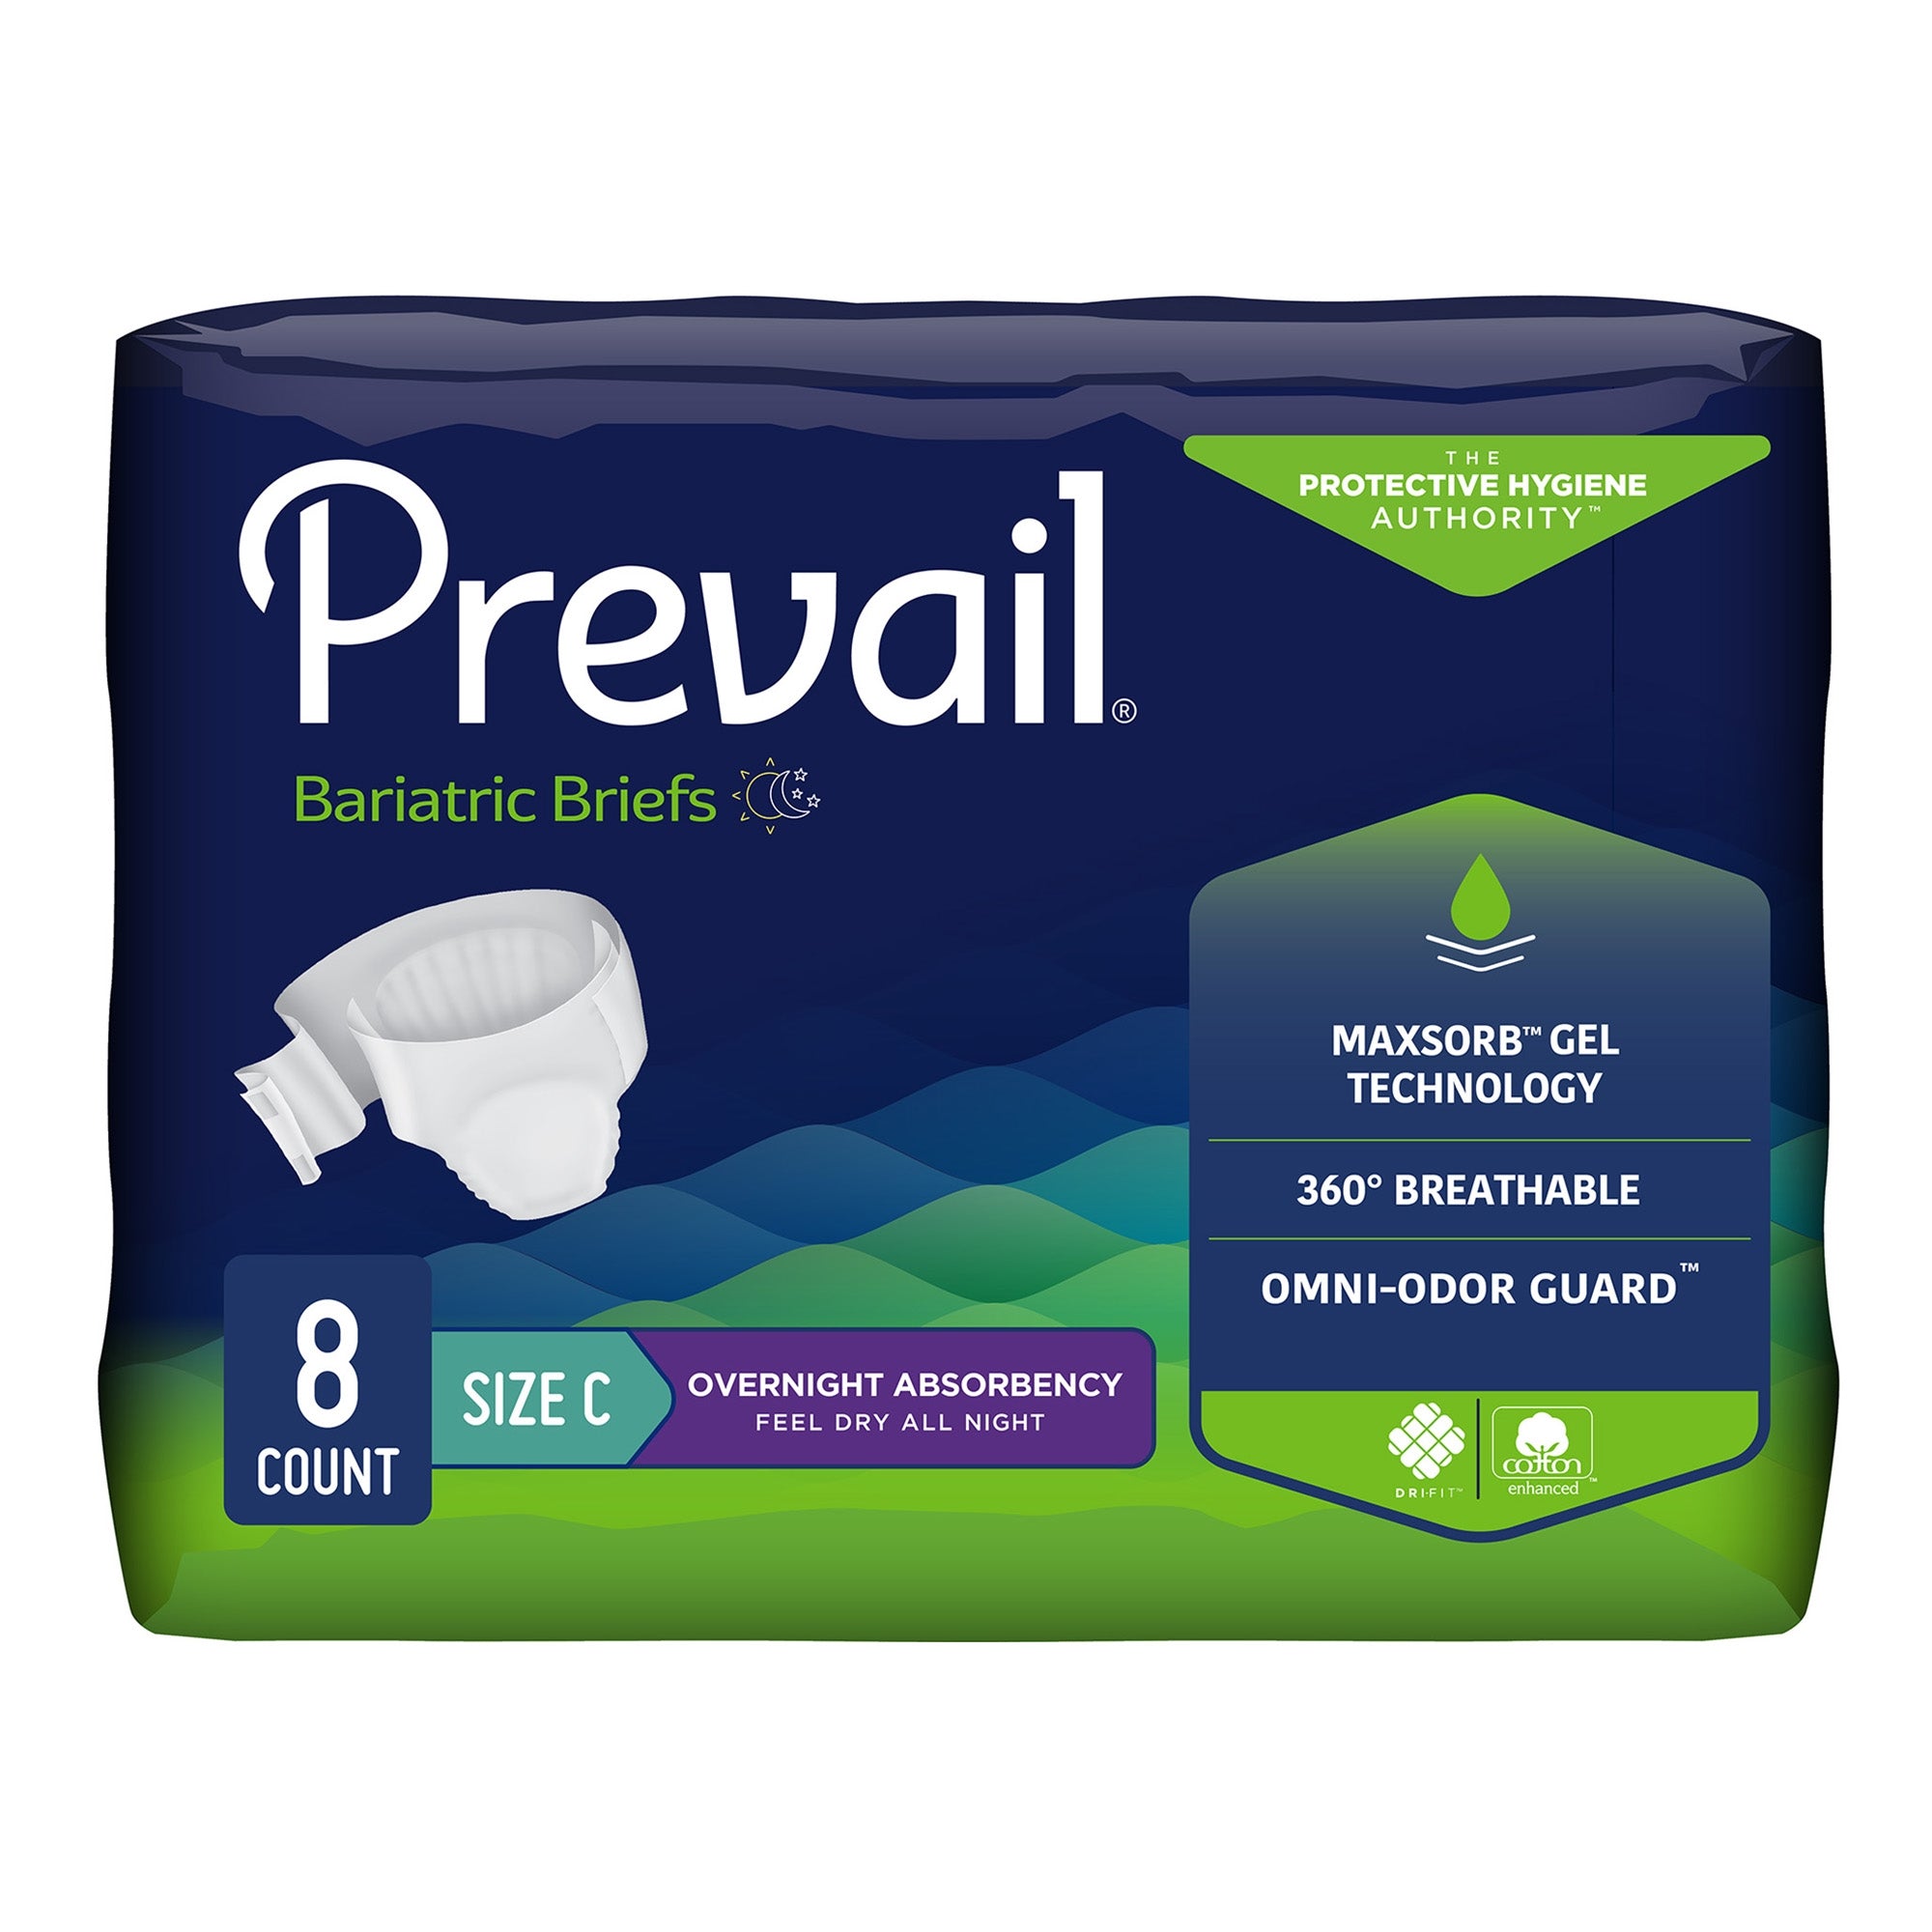 Prevail Bariatric Briefs - Unisex Incontinence Aid, Size C, Heavy Absorbency